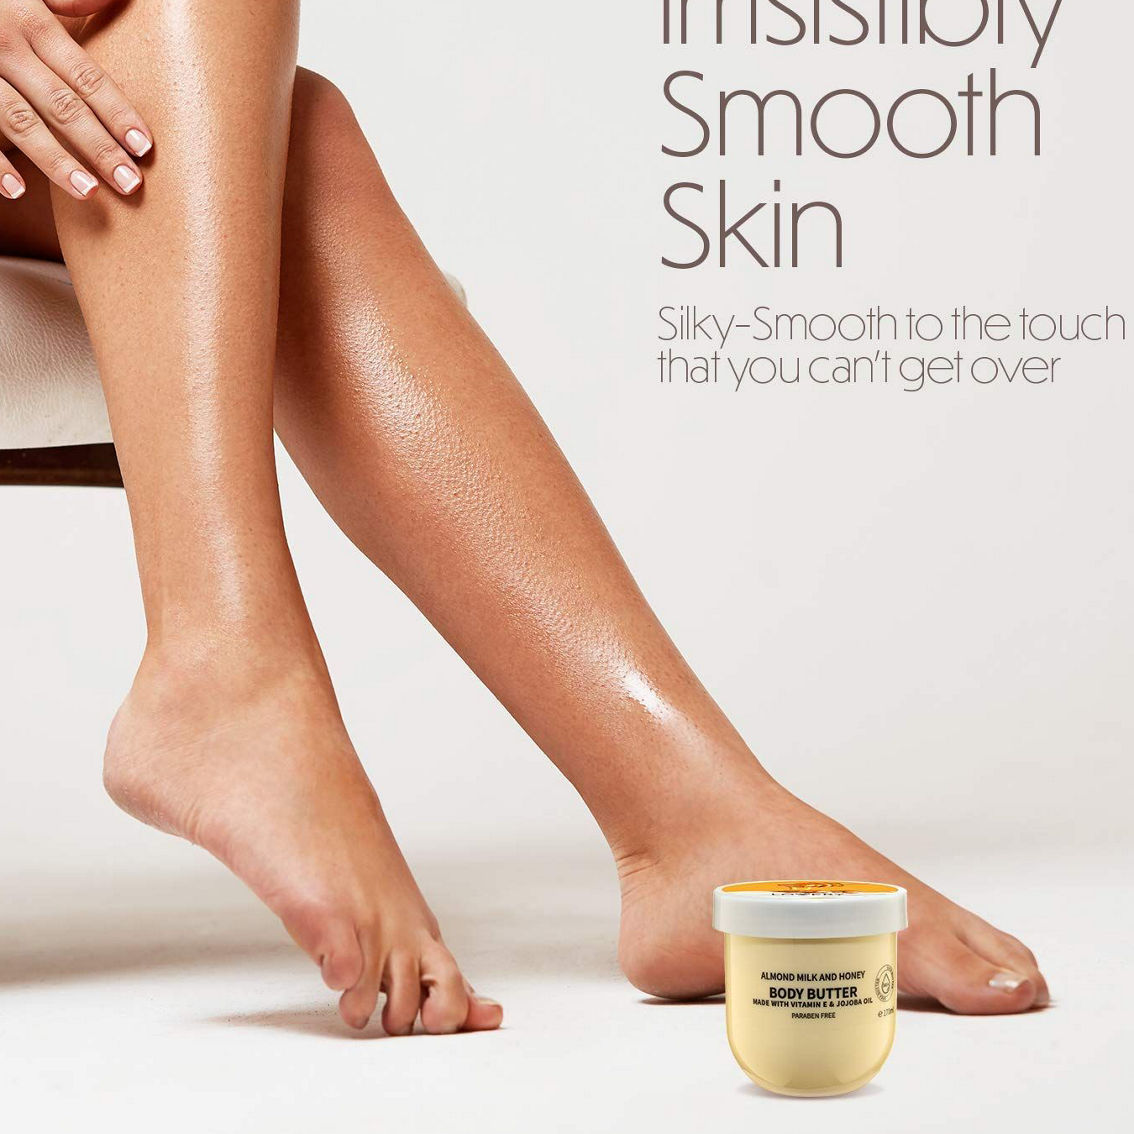 Lovery Almond Milk Whipped Body Butter 2 Piece - Image 4 of 4